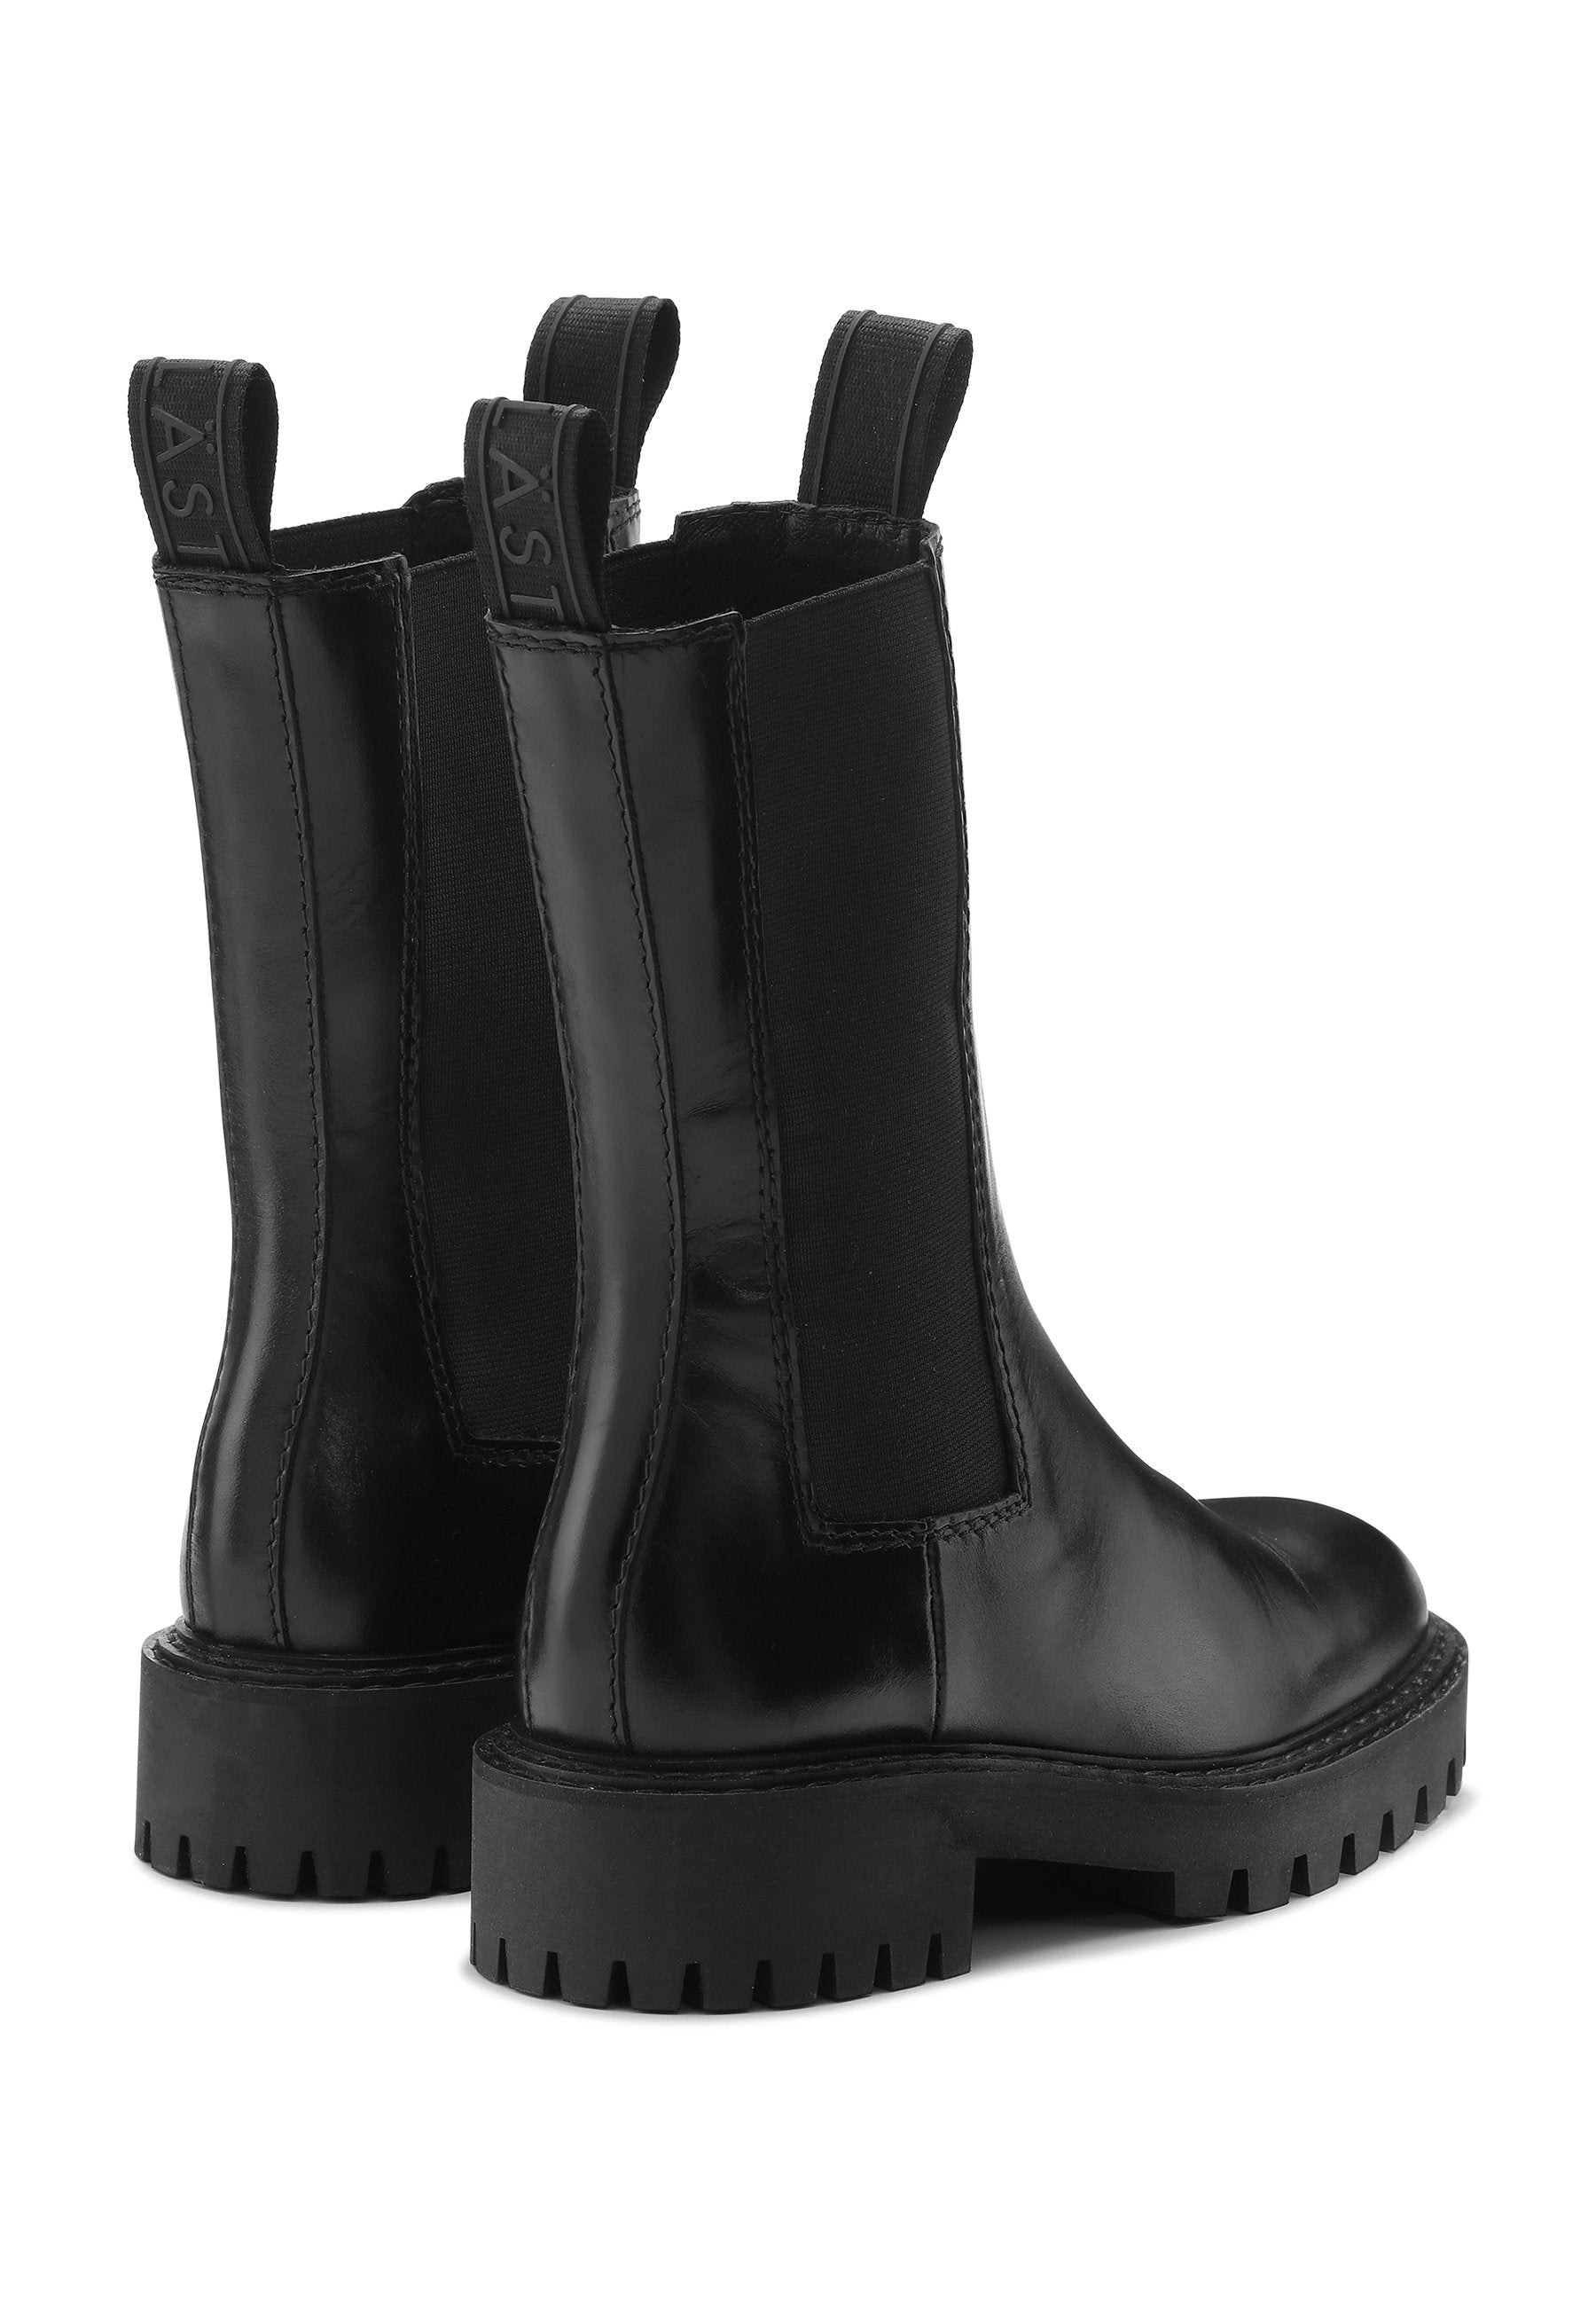 Angie Chelsea Black Boots LAST1127 -7